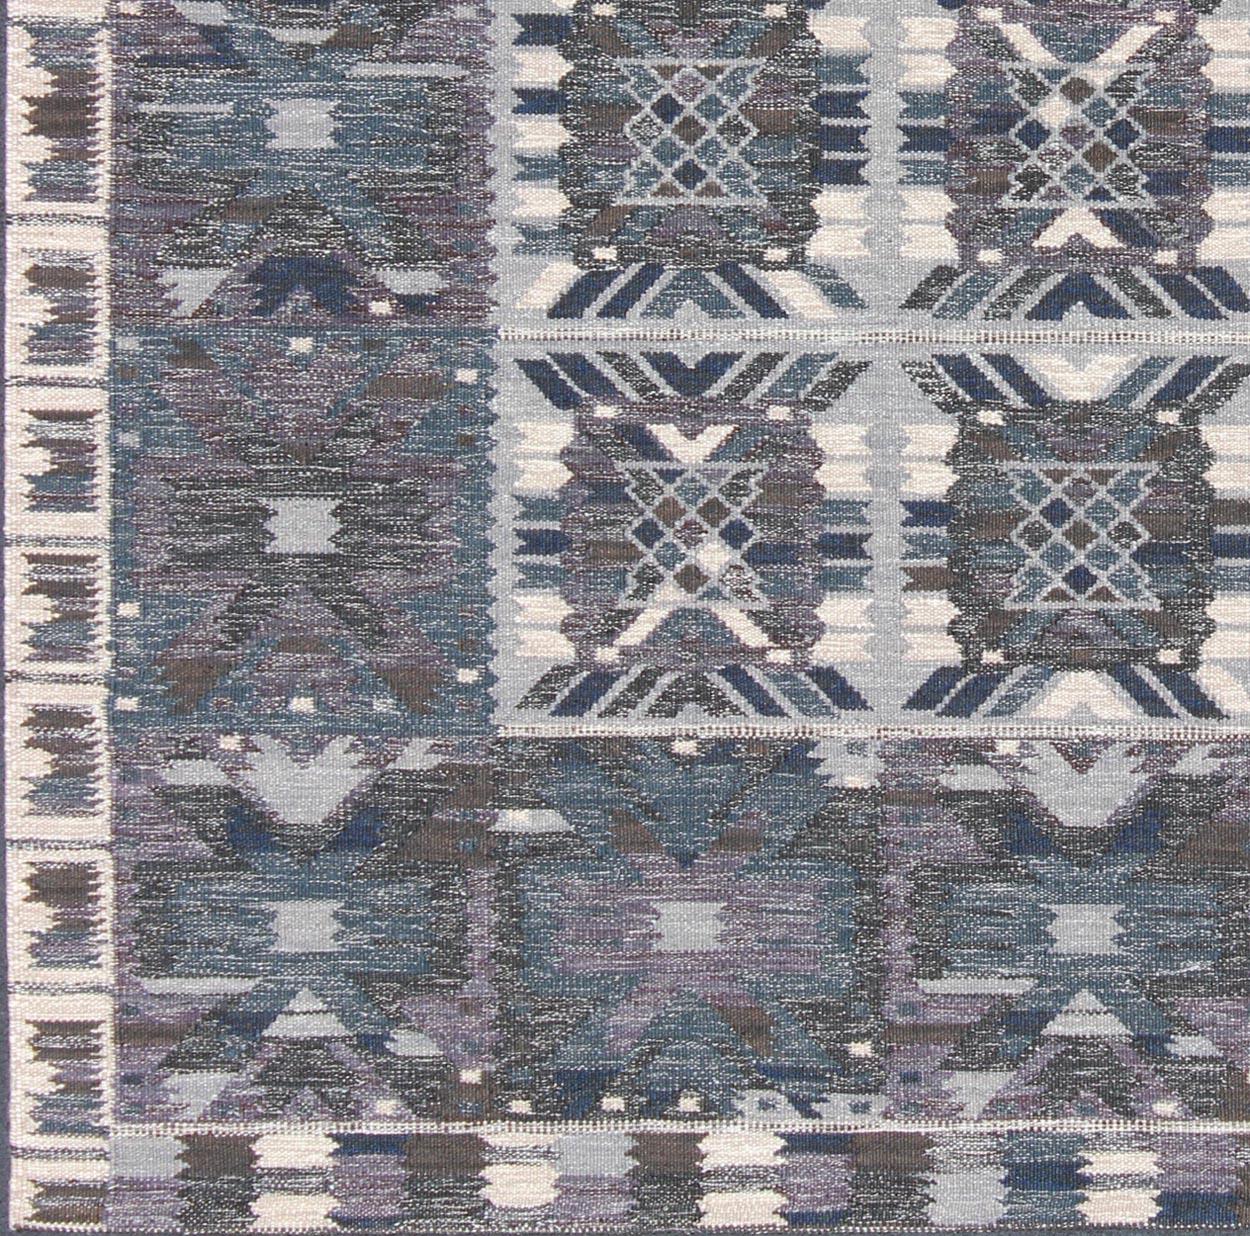 Gray, blue and charcoal Scandinavian flat-weave rug with modern design, rug rjk-16215-shb-001-09, country of origin / type: Scandinavia / Scandinavian Modern

This modern Scandinavian design flat-weave rug is inspired by the work of Swedish textile